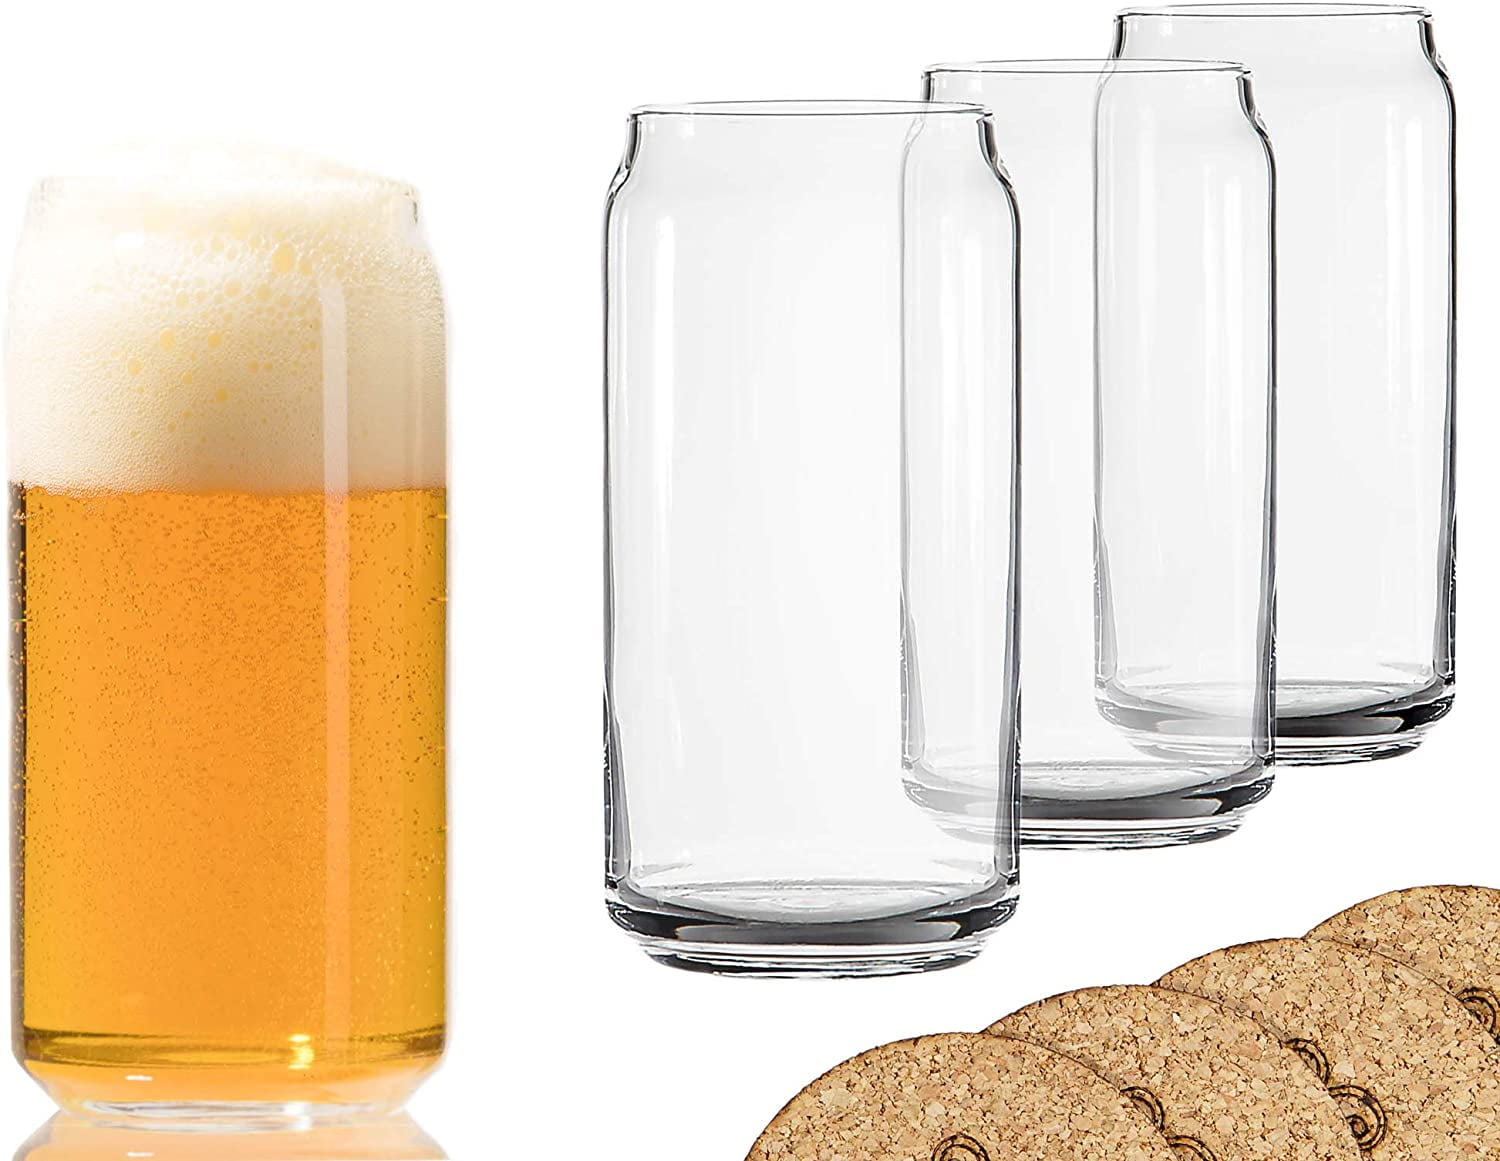 Libbey Can Shaped Beer Glass 4 PACK w/ Pourer 16 oz